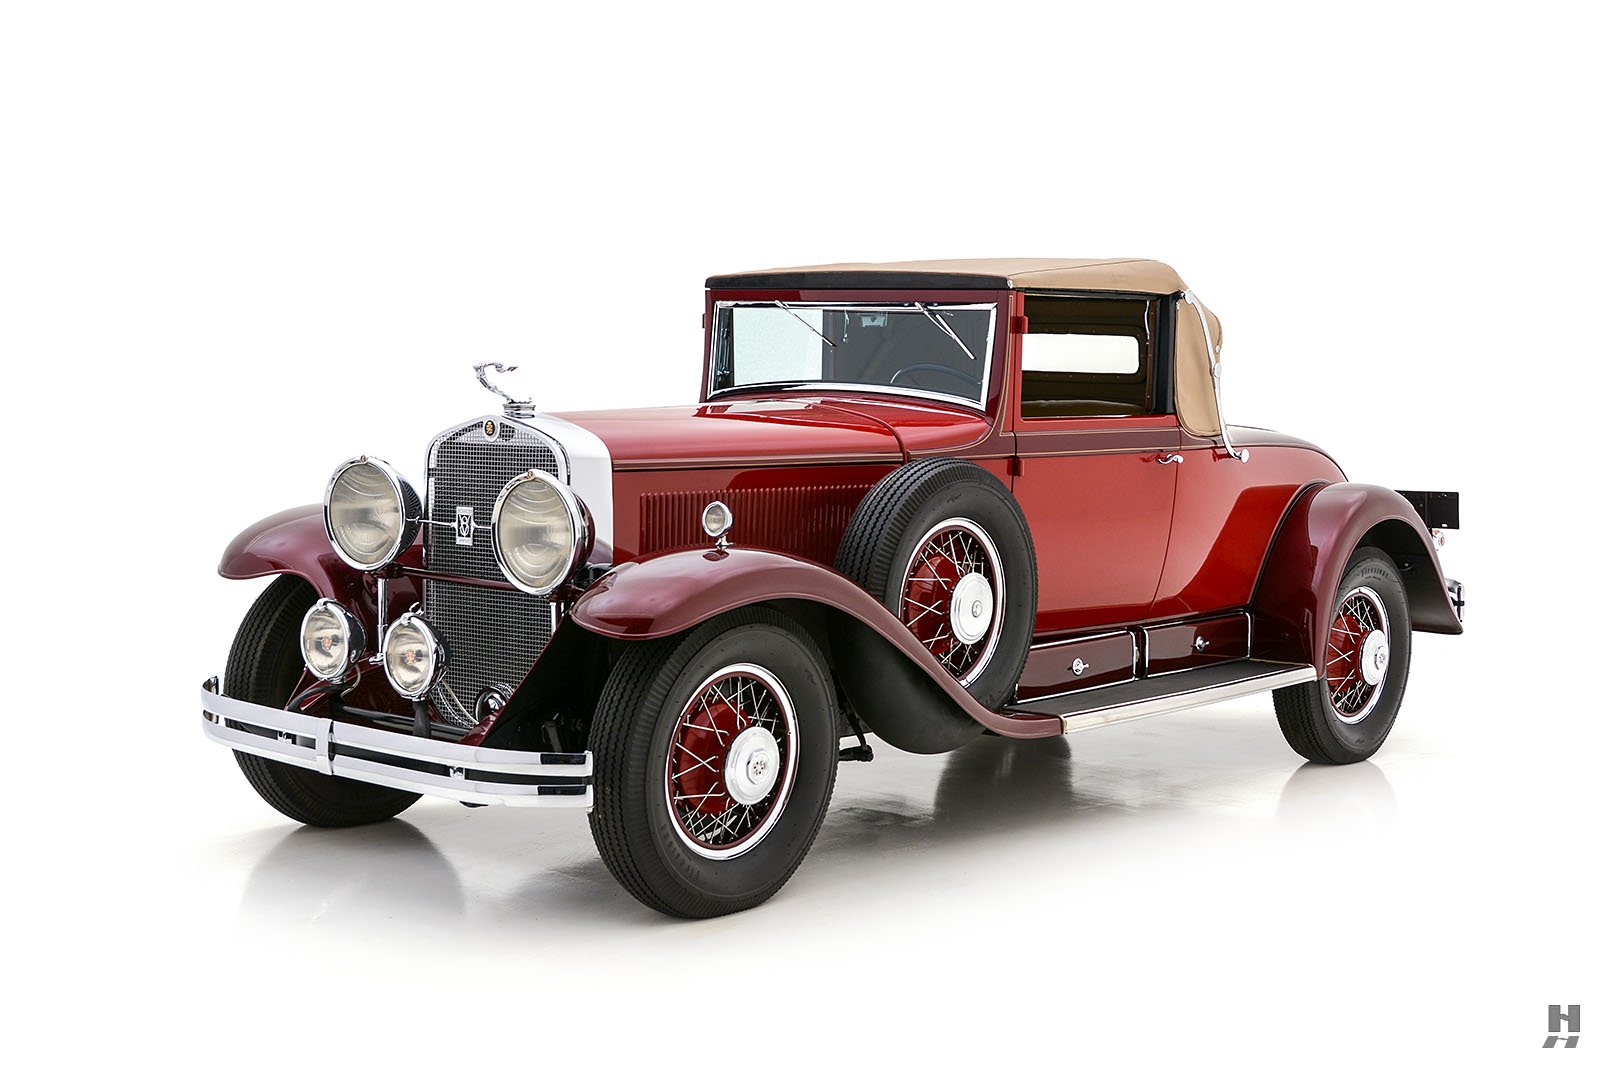 1930 Cadillac Model 353 For Sale | Vintage Driving Machines